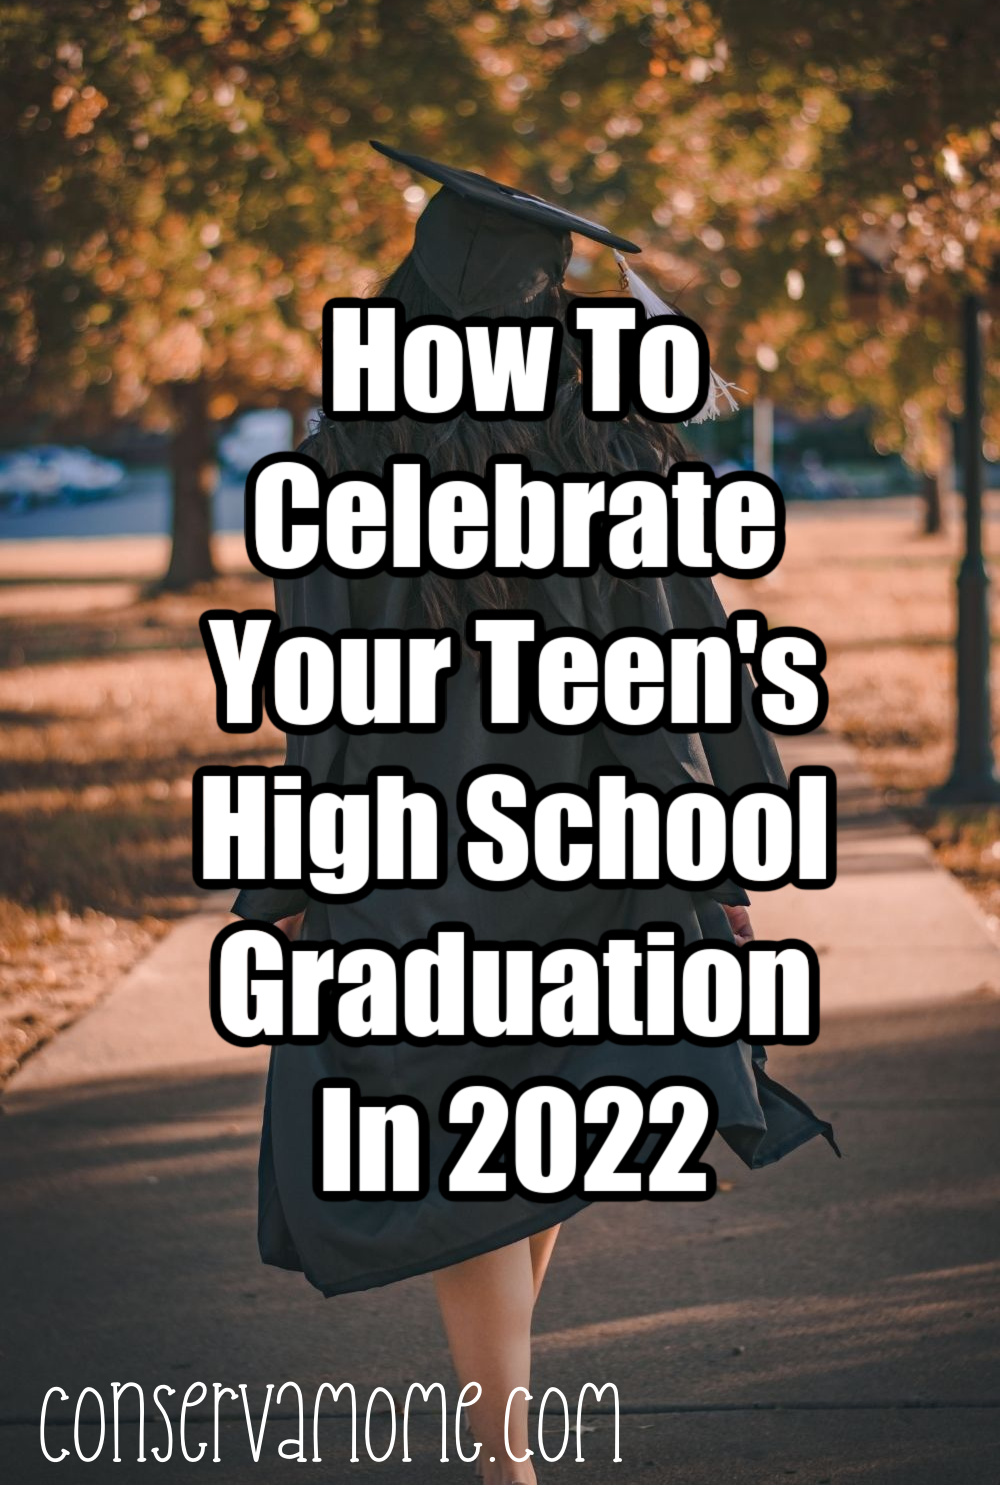 How To Celebrate Your Teen's High School Graduation In 2022